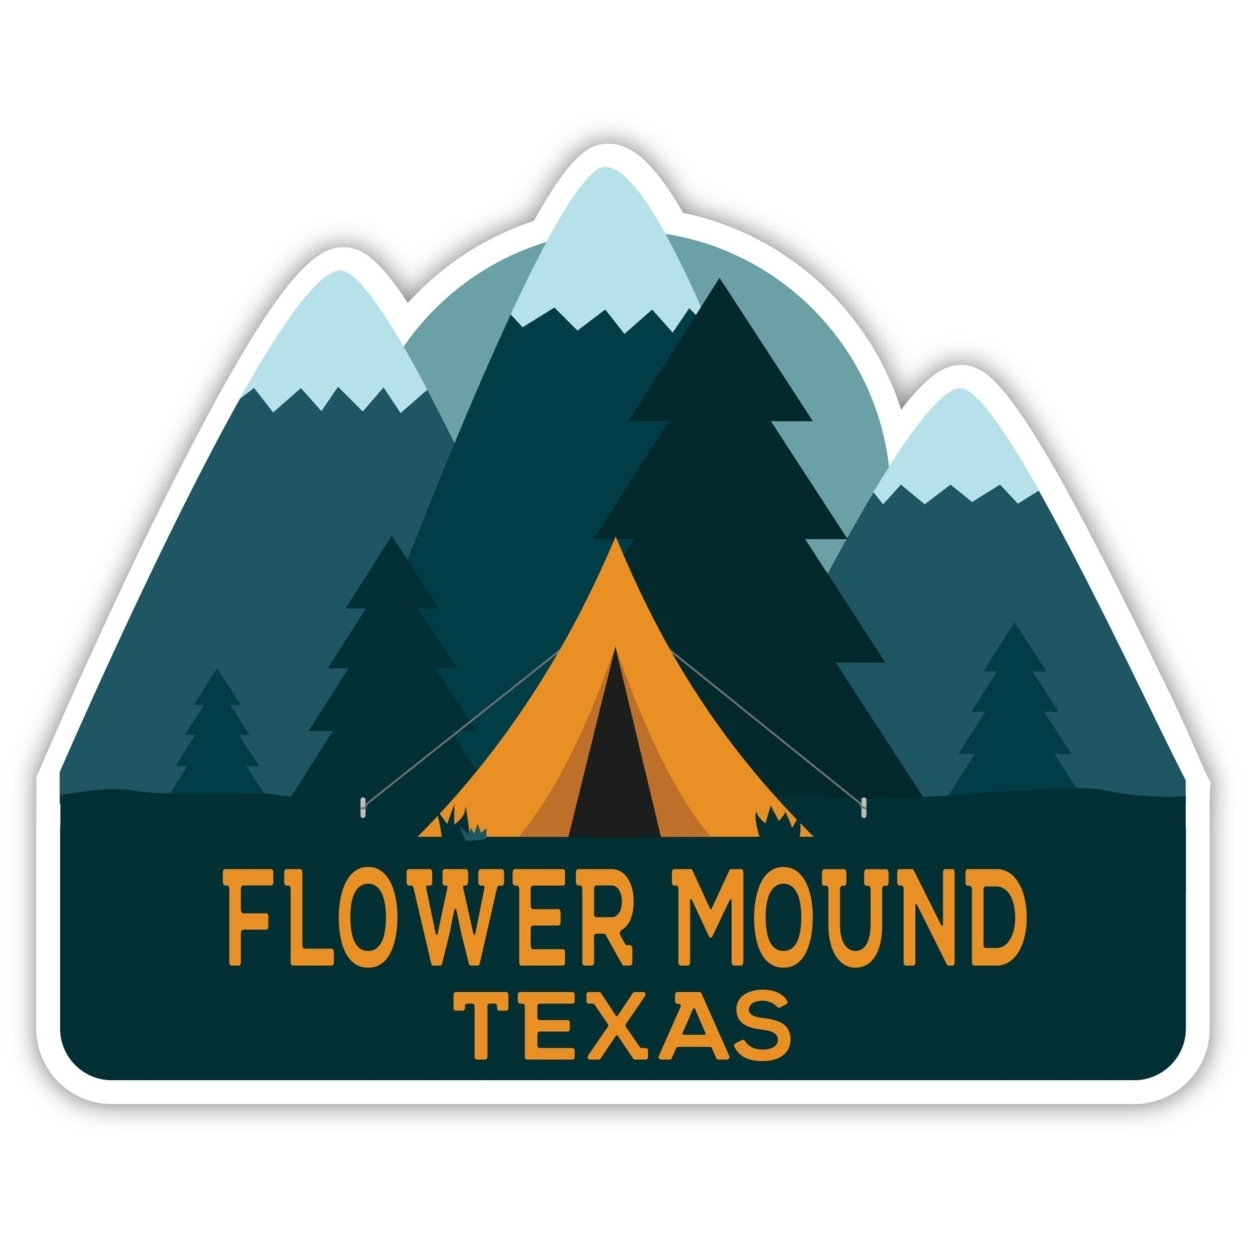 Flower Mound Texas Souvenir Decorative Stickers (Choose Theme And Size) - 4-Pack, 6-Inch, Bear